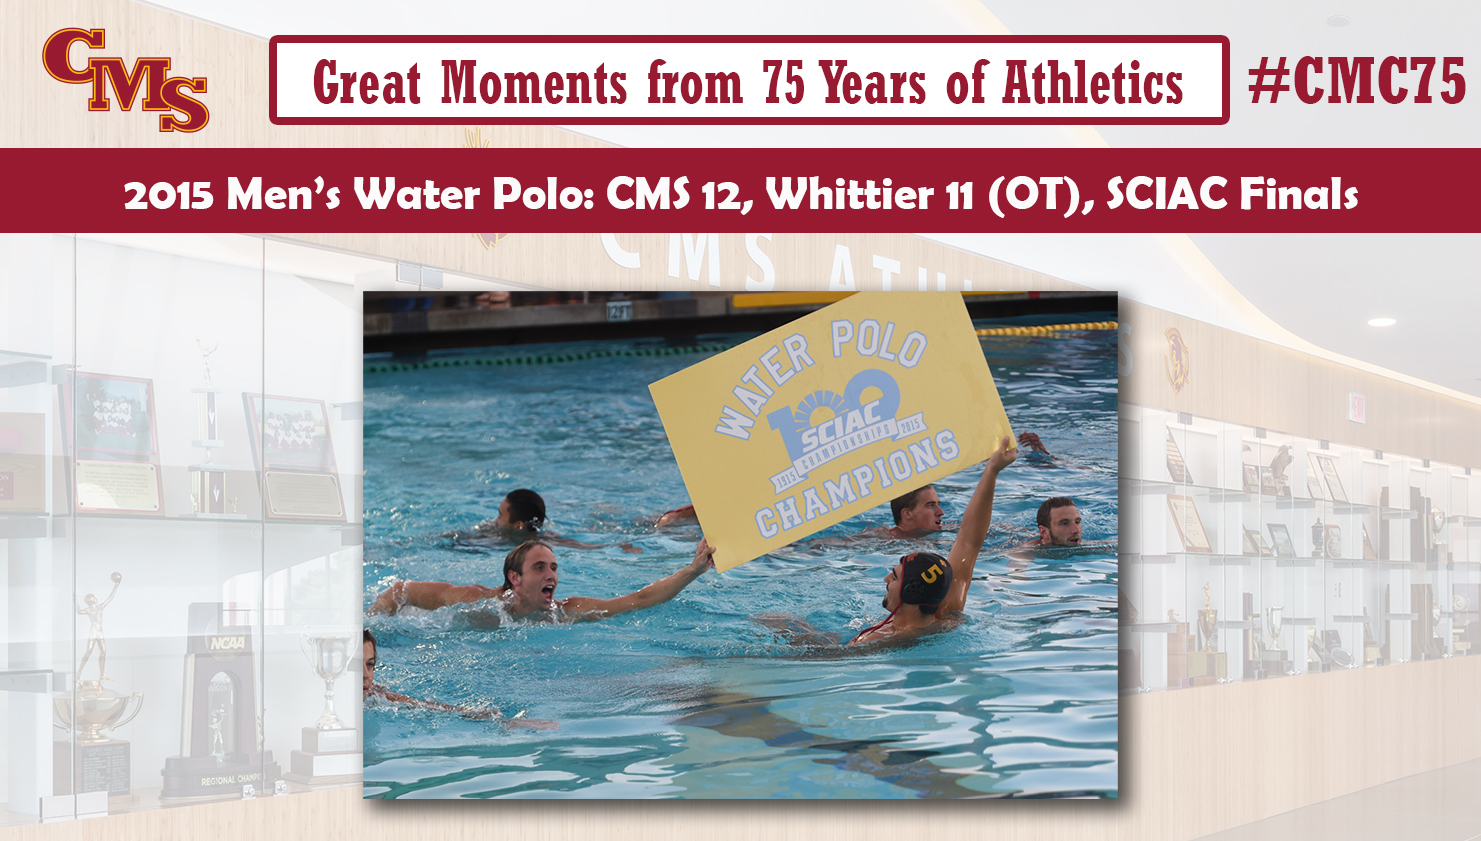 CMS celebrating with the championship banner. Words over the photo read: Great Moments from 75 Years of Athletics, 2015 Men's Water Polo: CMS 12, Whittier 11 (OT), SCIAC Finals